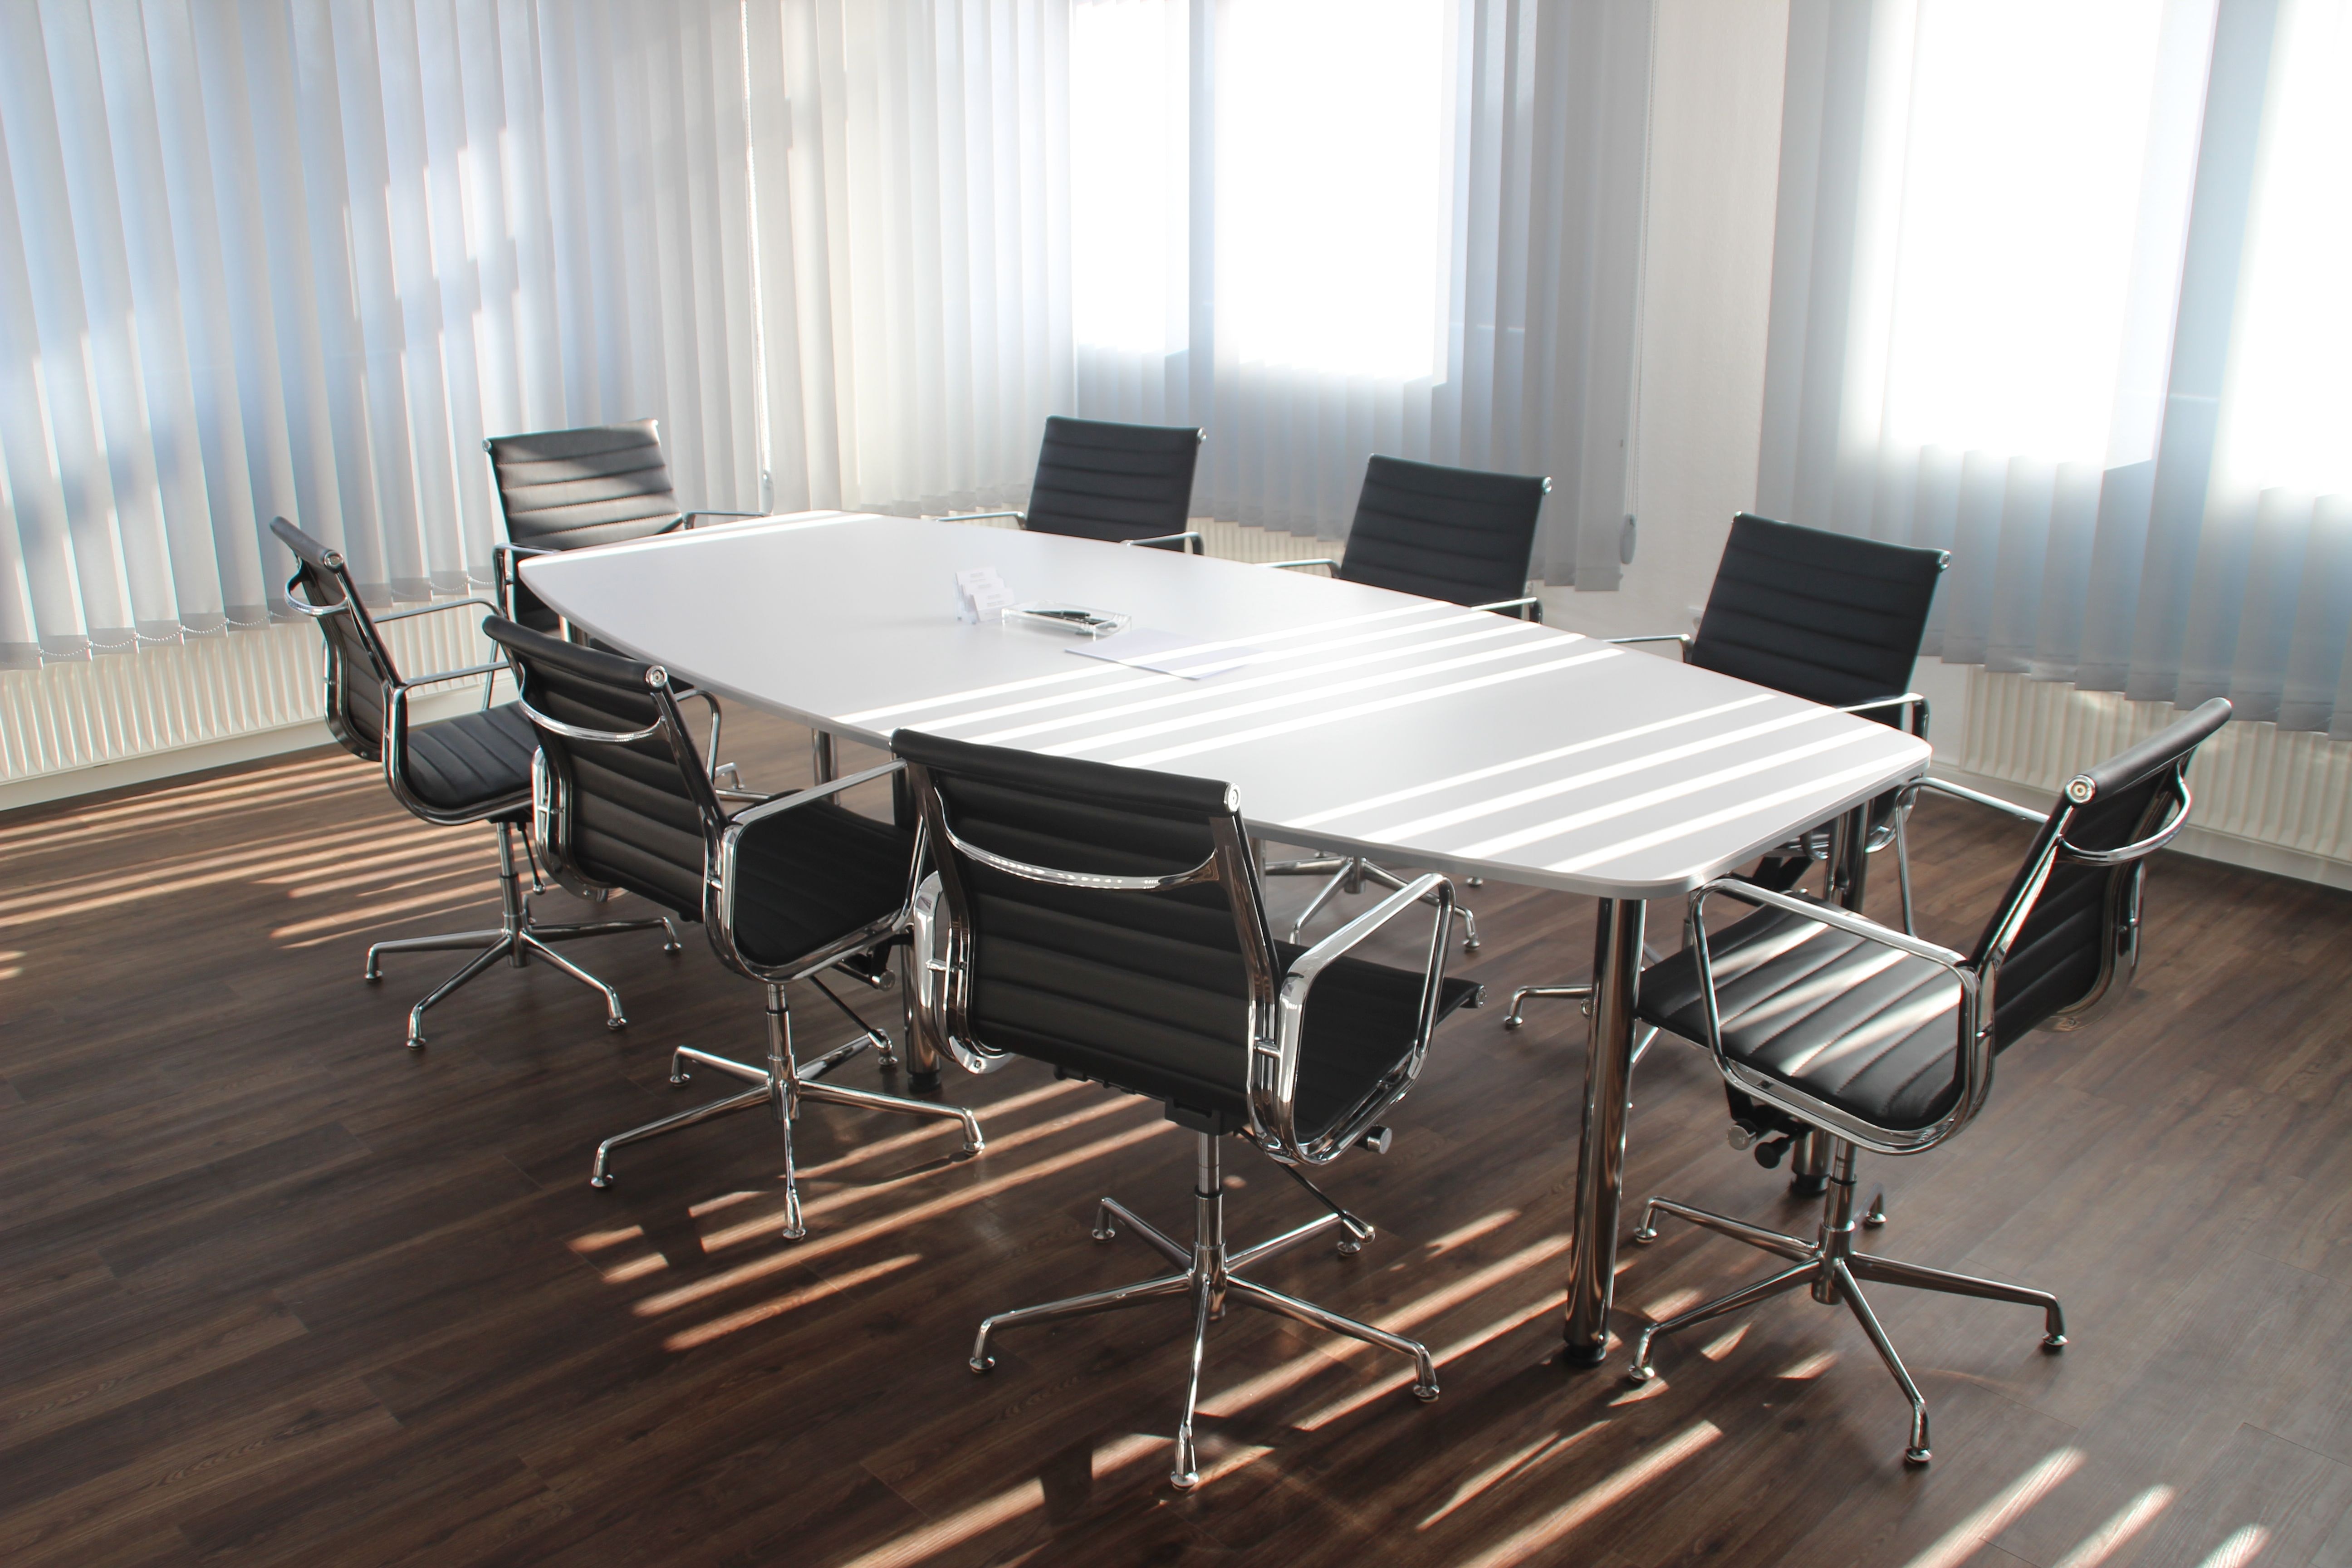 Image of business conference table and chairs